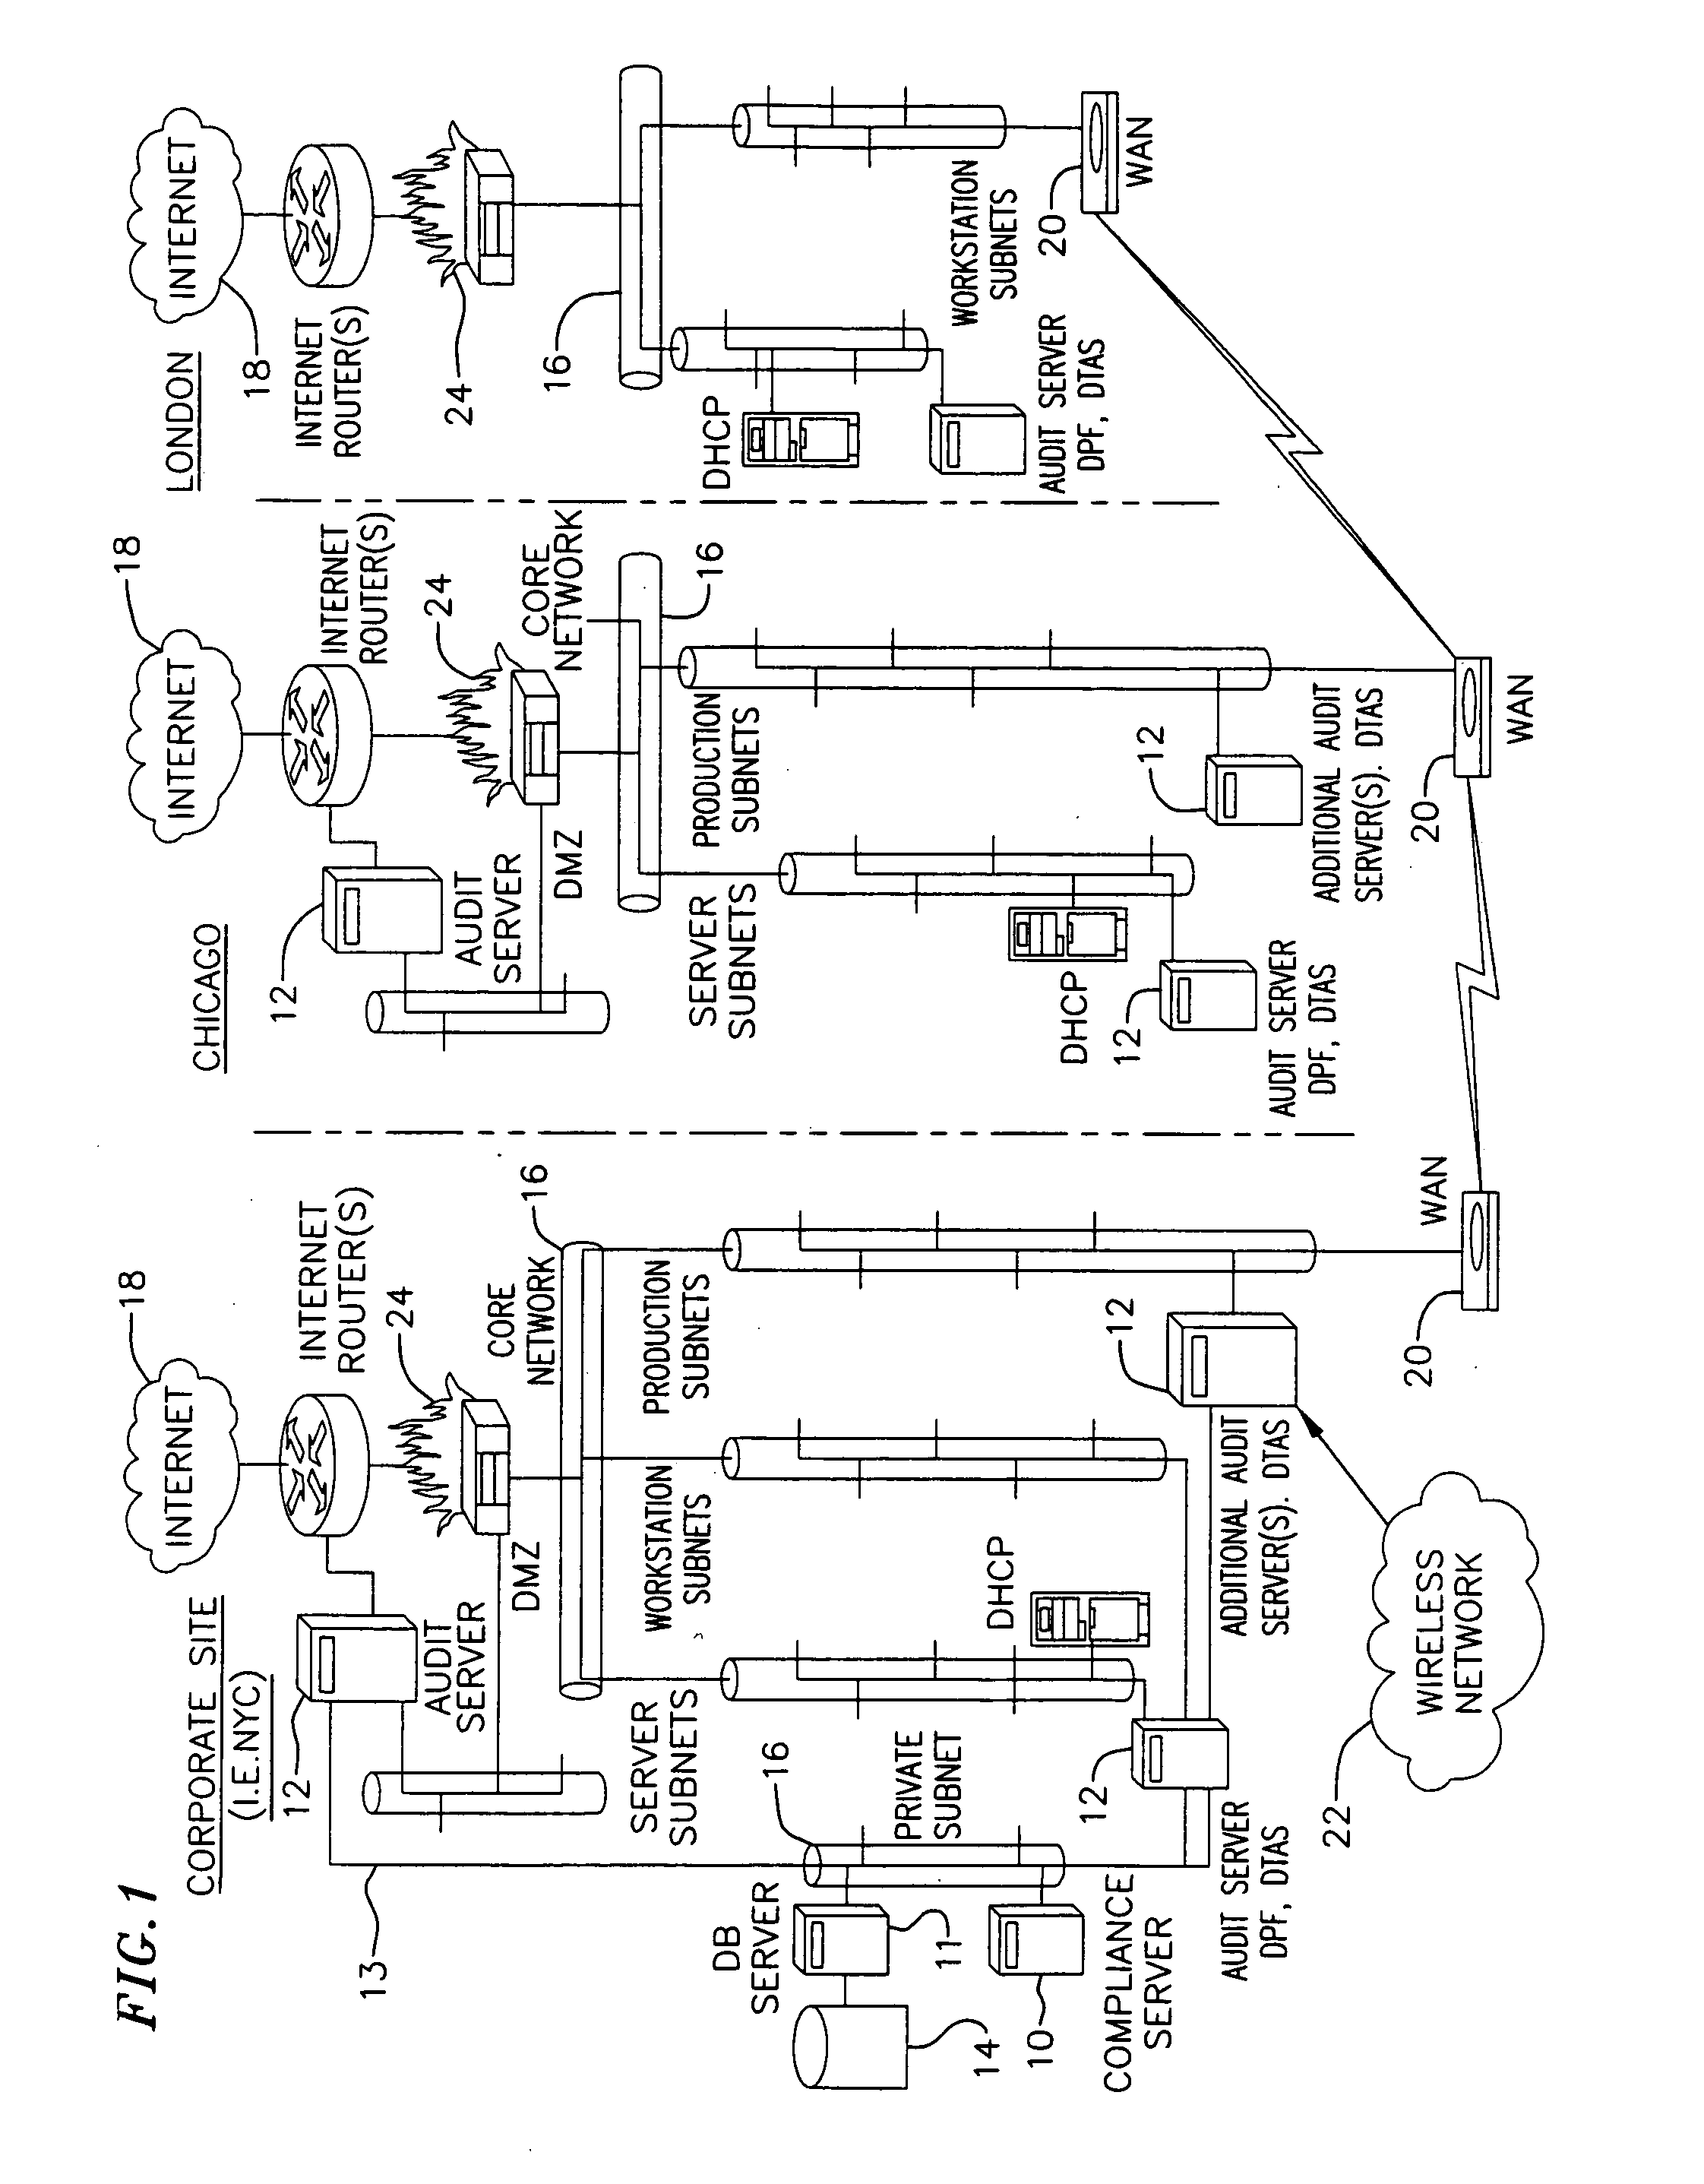 System and method for automated policy audit and remediation management